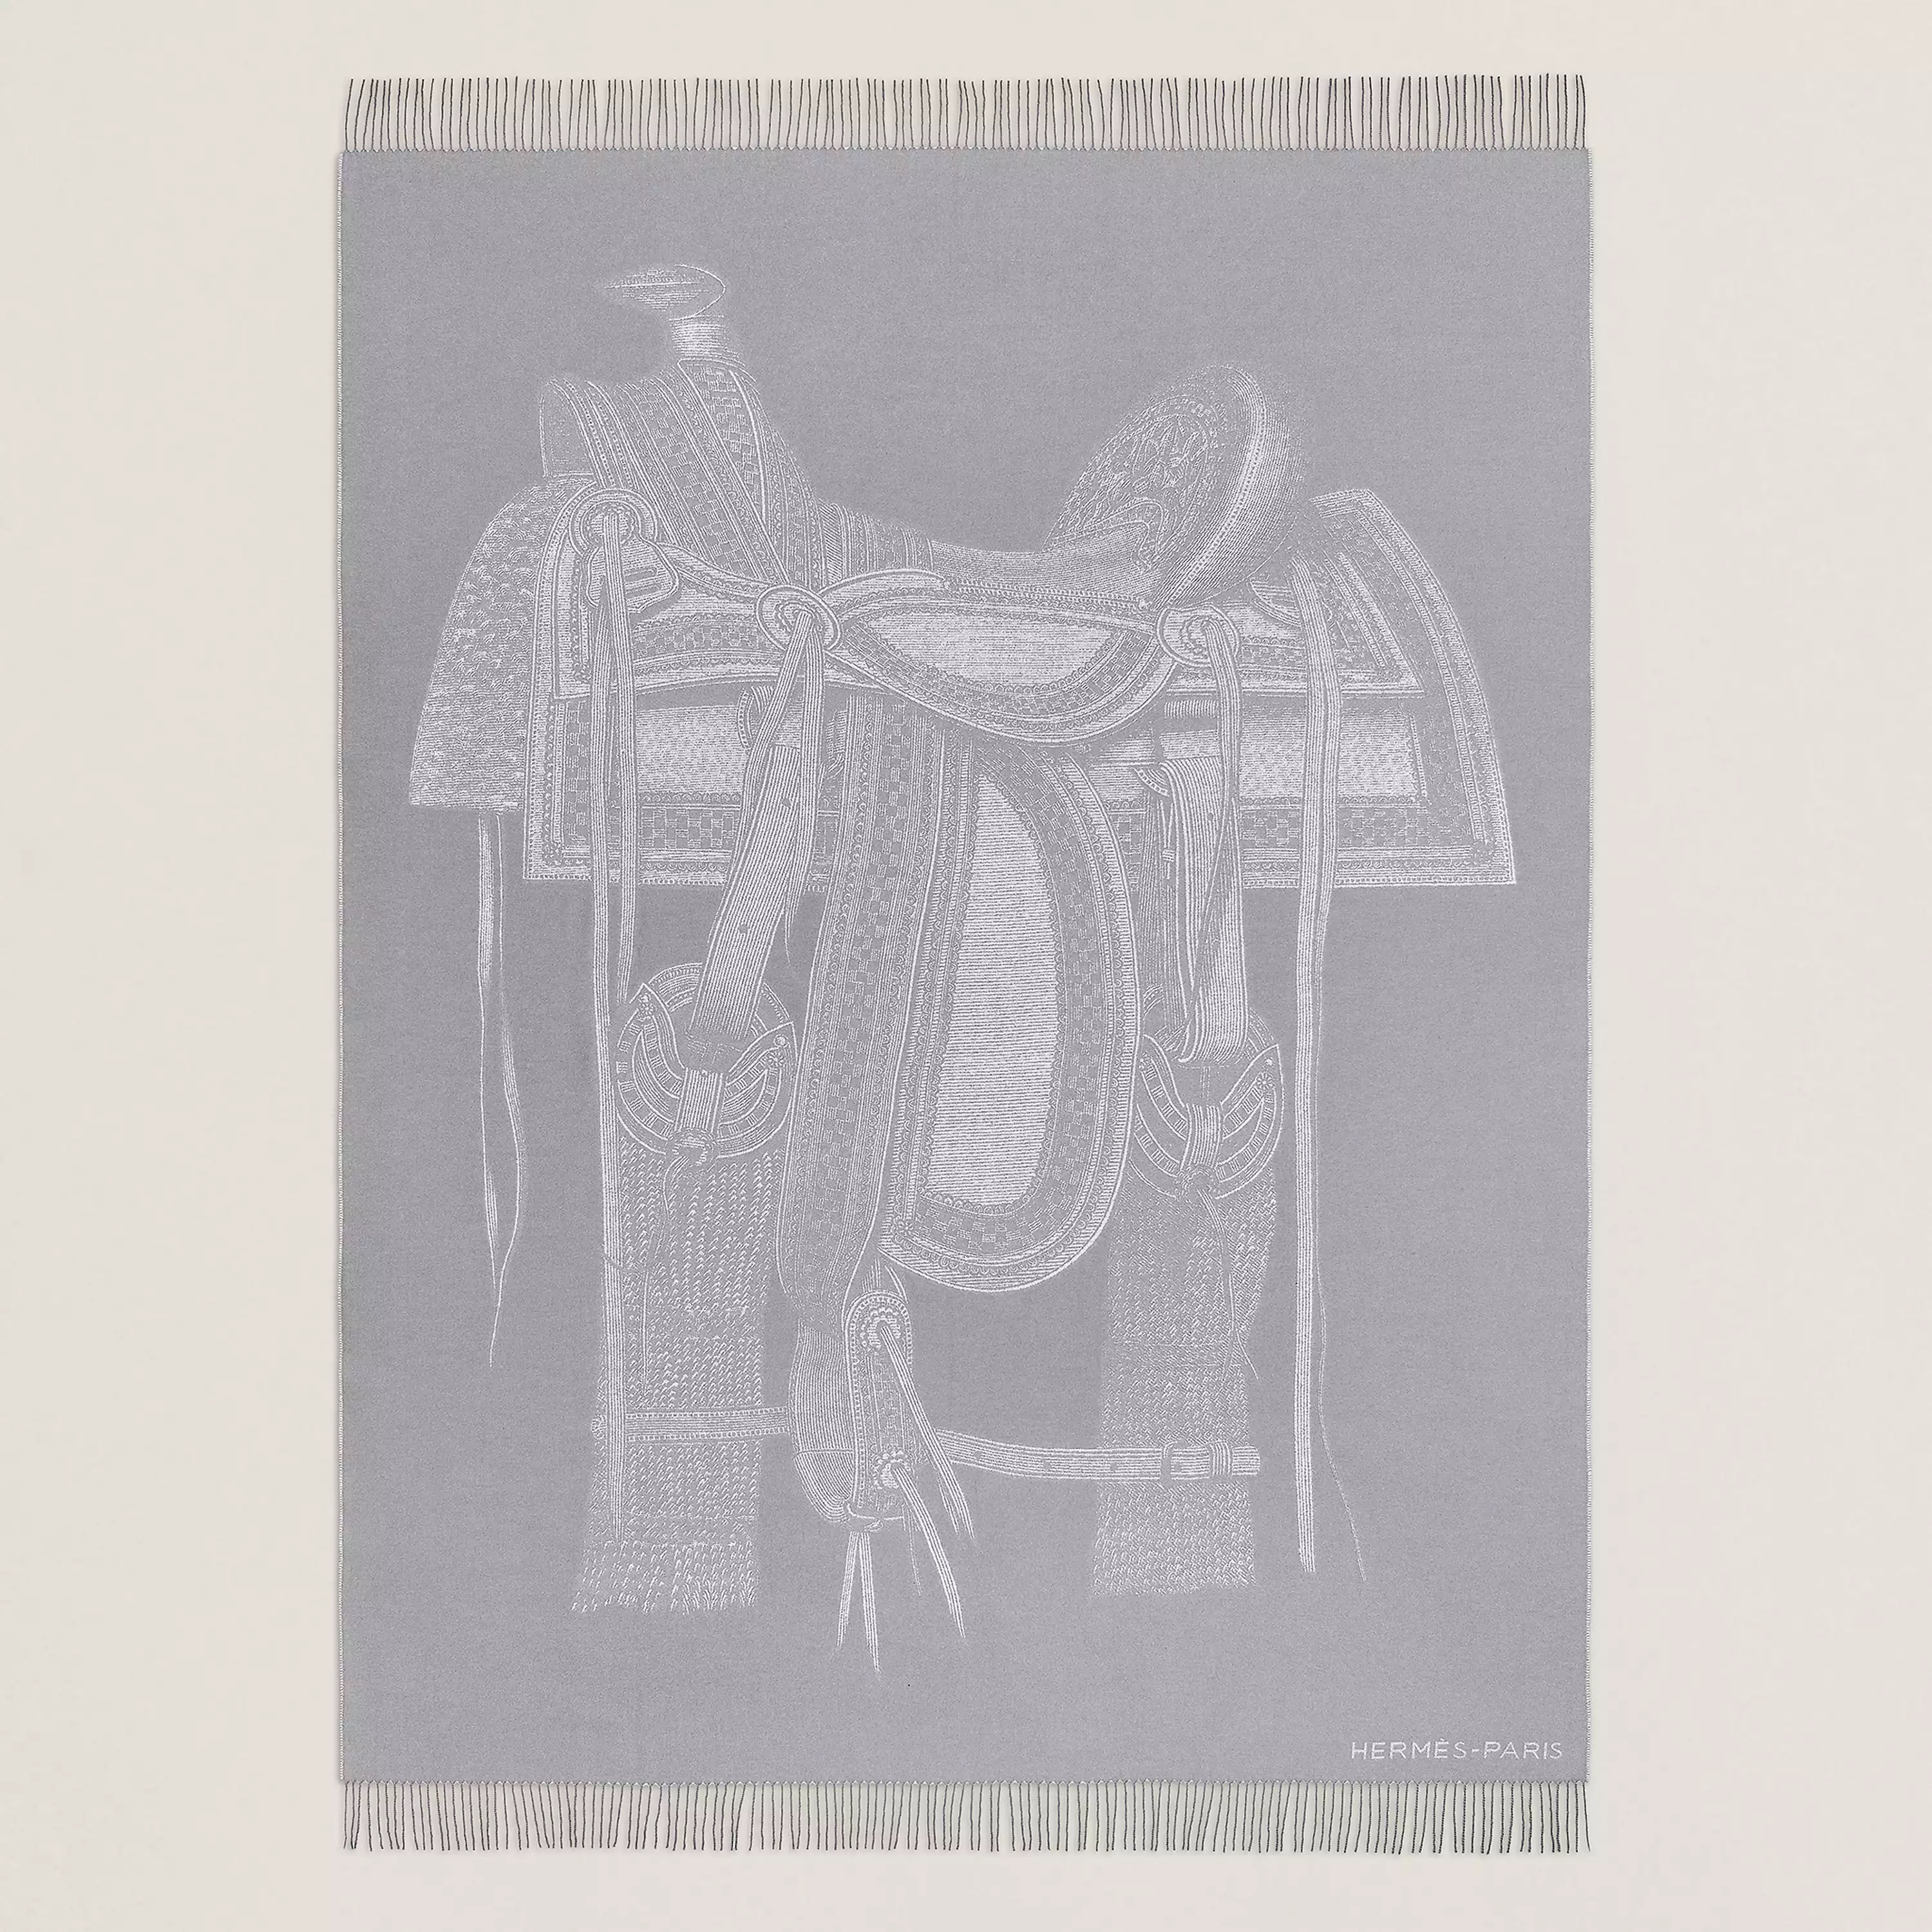 Selle Far West Blanket in jacquard woven cashmere and fringe finishing (100% cashmere). Measures 59.1" x 78.7" $3650. Photo via Hermes.com